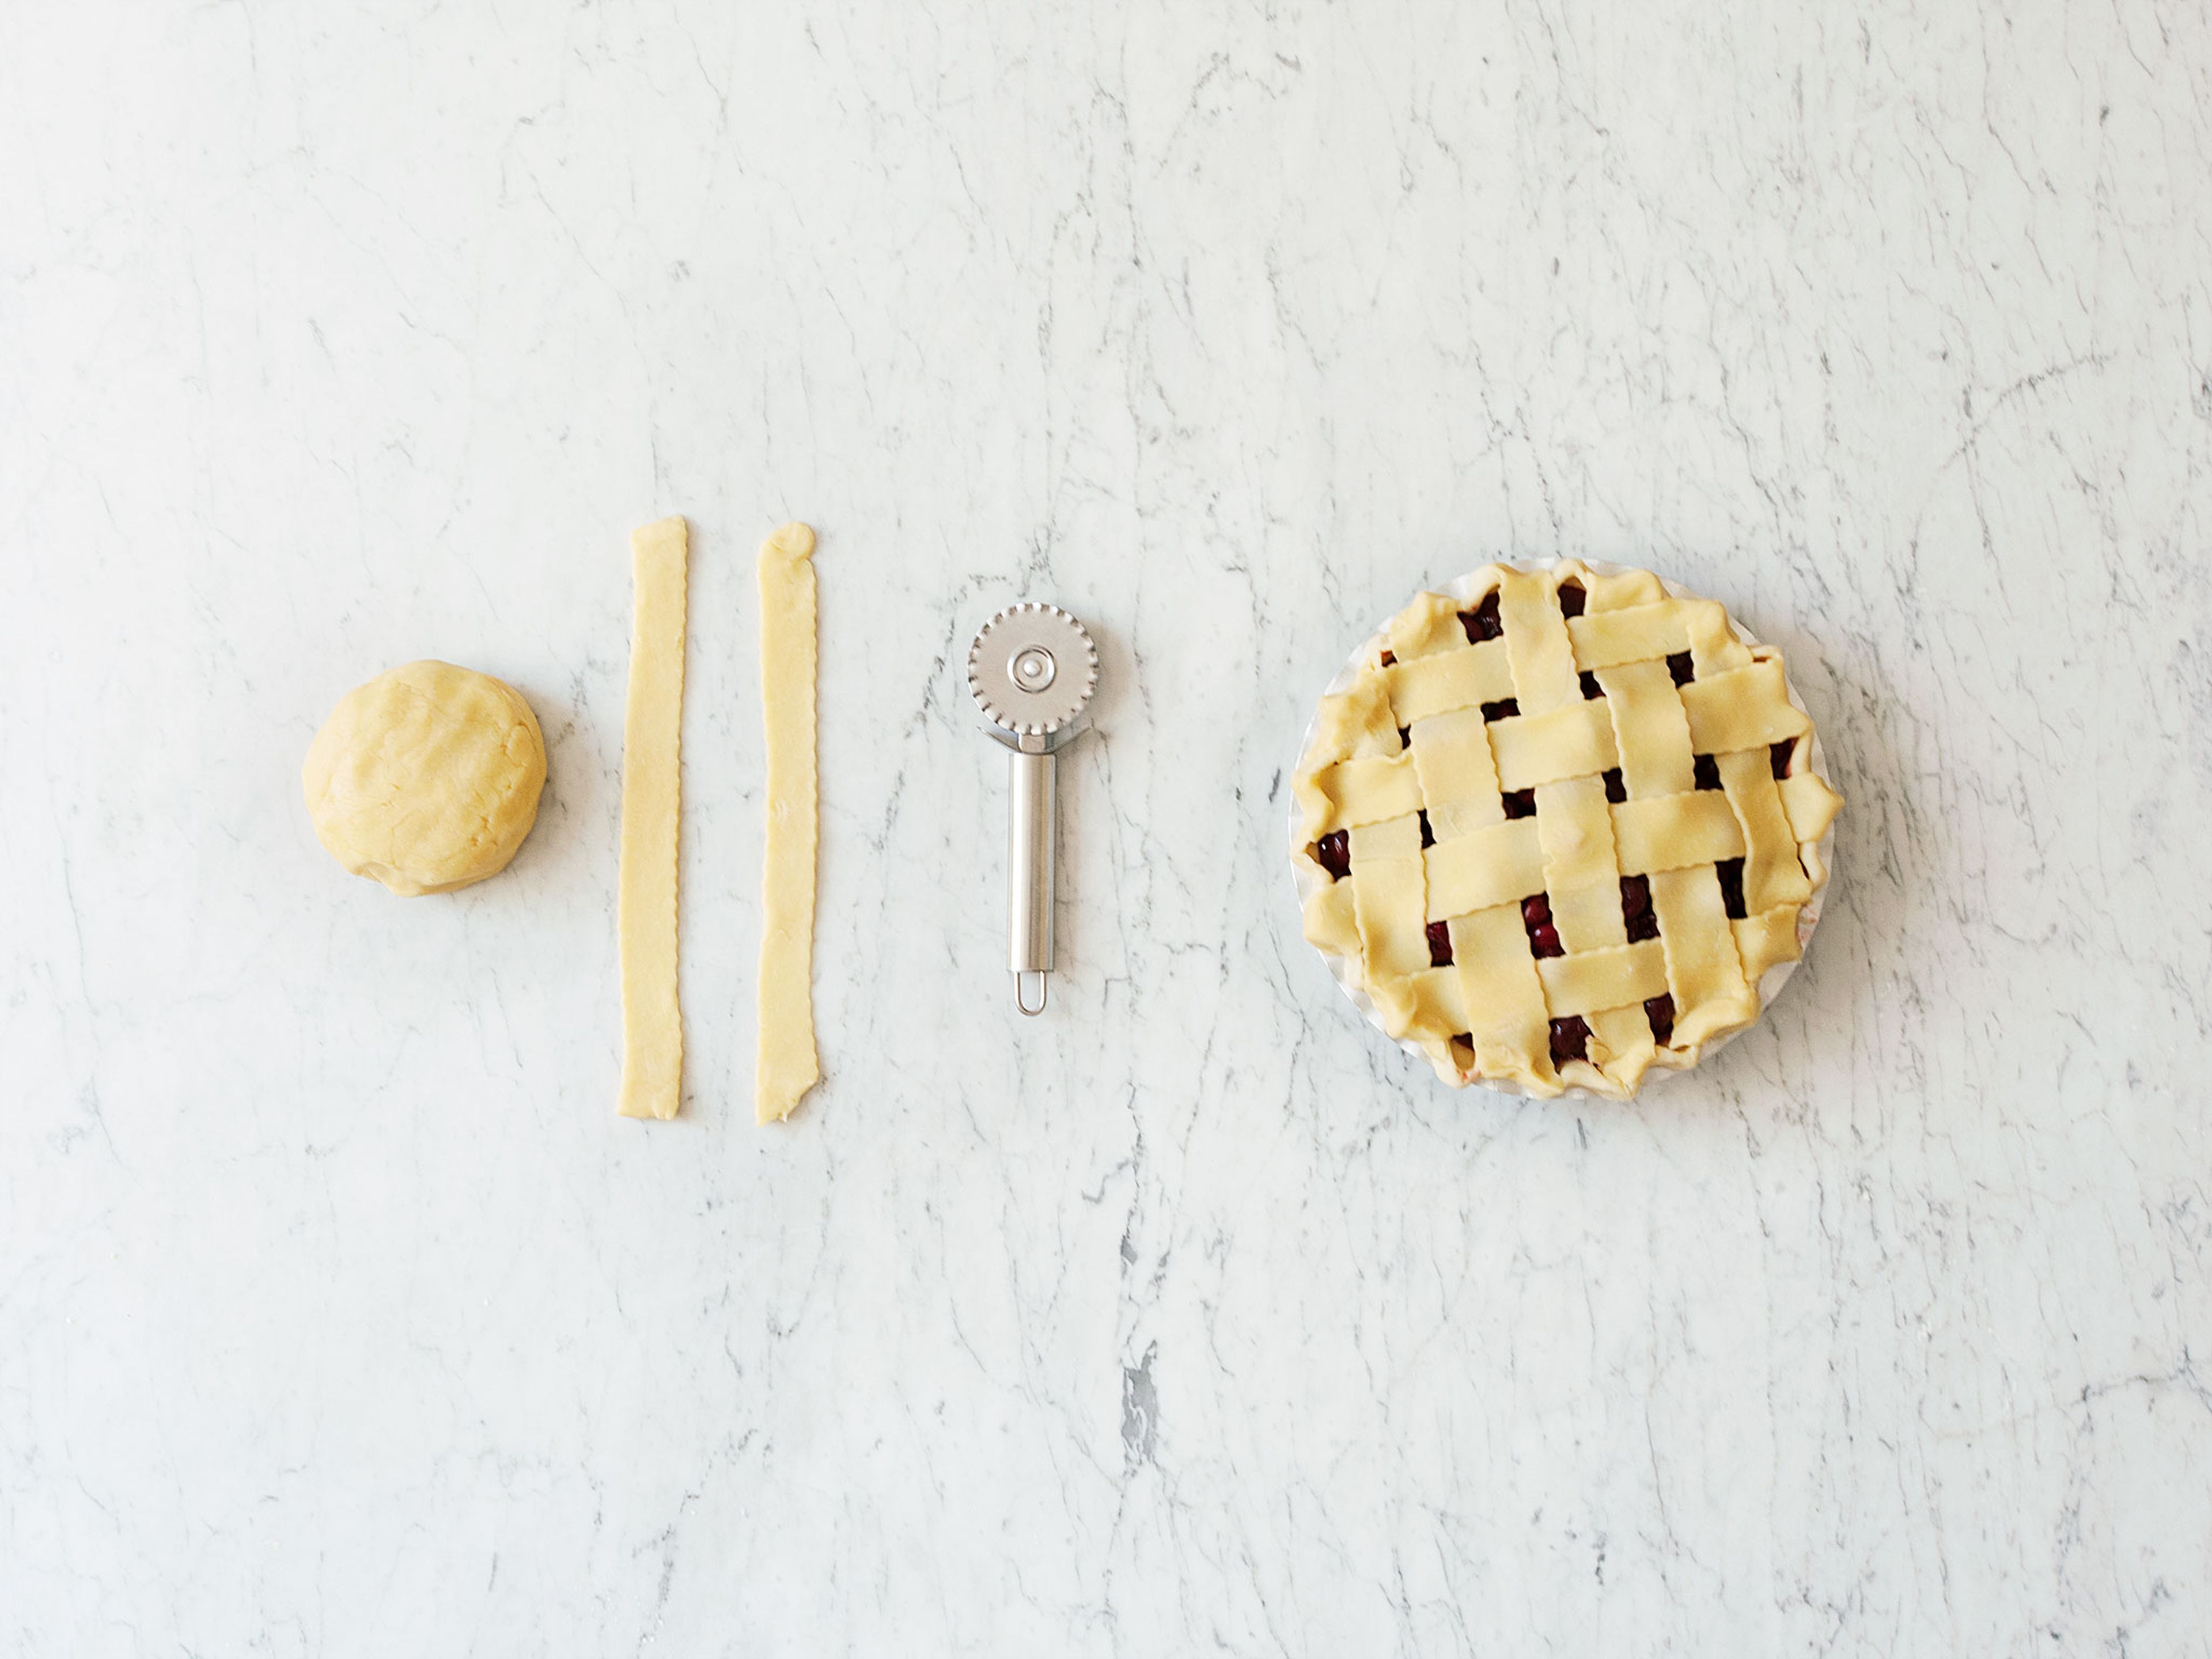 The easiest way for prettier pies